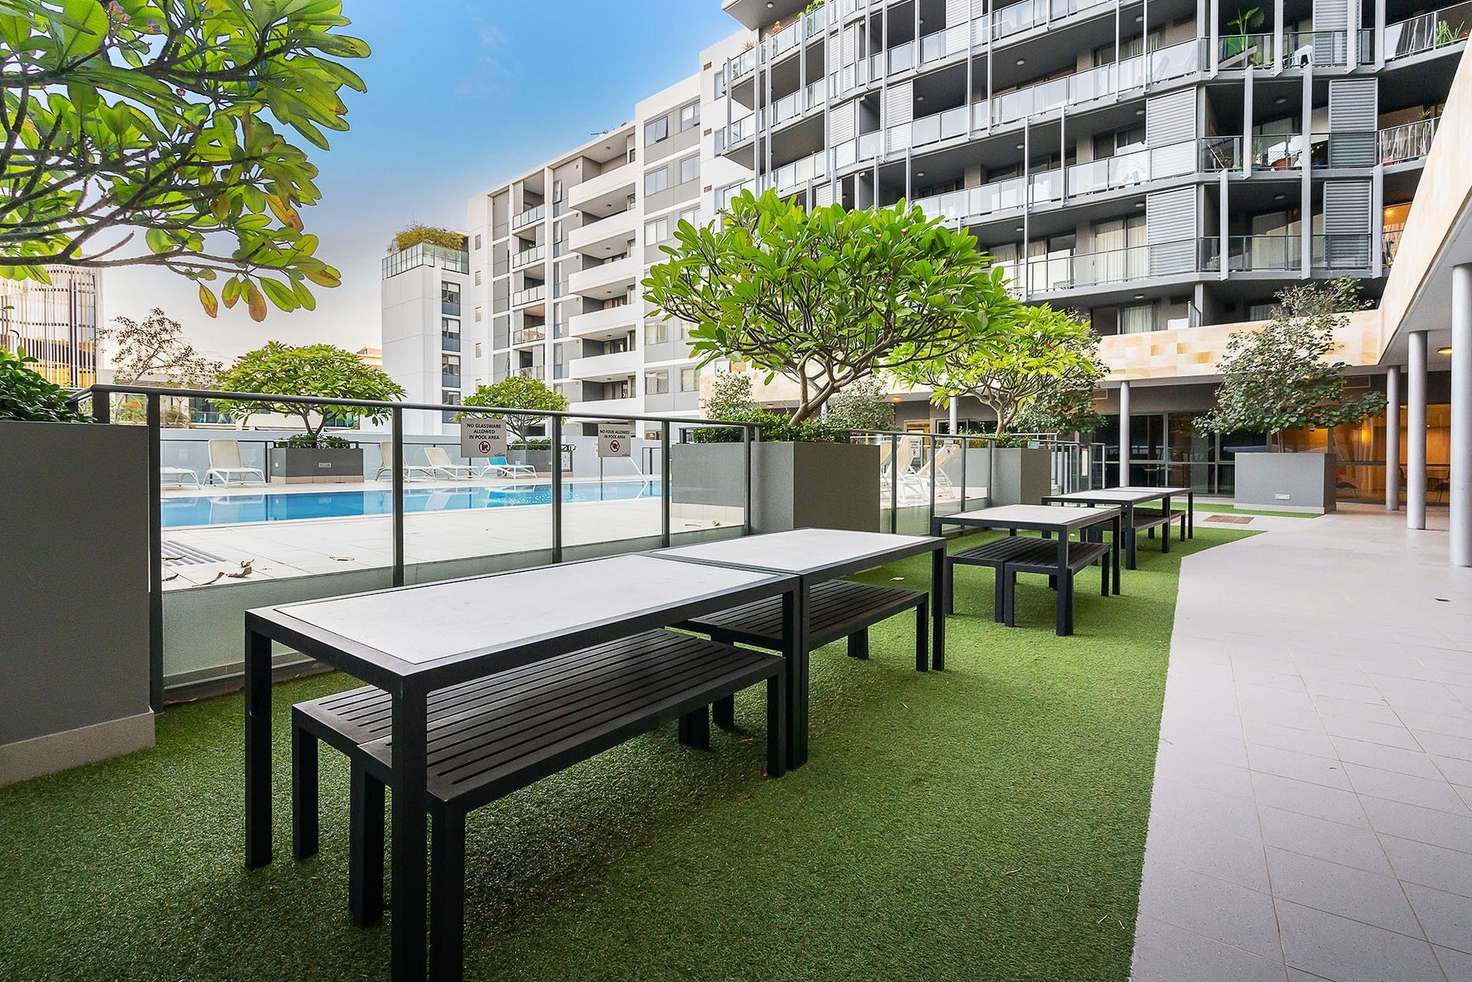 Main view of Homely apartment listing, 316/26 Hood Street, Subiaco WA 6008